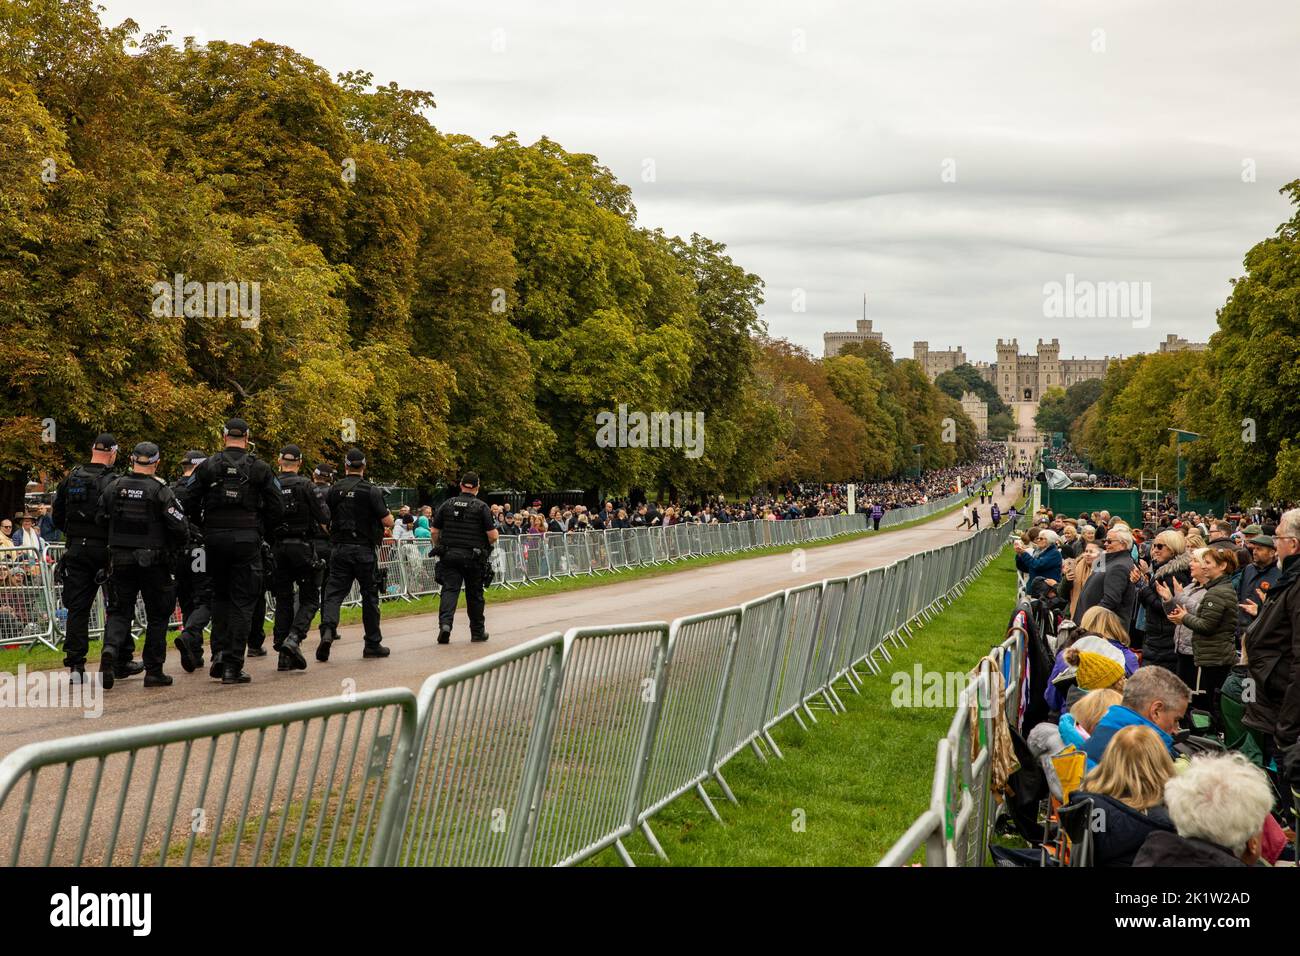 Windsor, UK. 19th September, 2022. Mourners applaud heavily armed police officers on the Long Walk in Windsor Great Park prior to the procession of Queen Elizabeth II's coffin to St George’s Chapel for the Committal Service. Queen Elizabeth II, the UK's longest-serving monarch, died at Balmoral aged 96 on 8th September 2022 after a reign lasting 70 years. Credit: Mark Kerrison/Alamy Live News Stock Photo